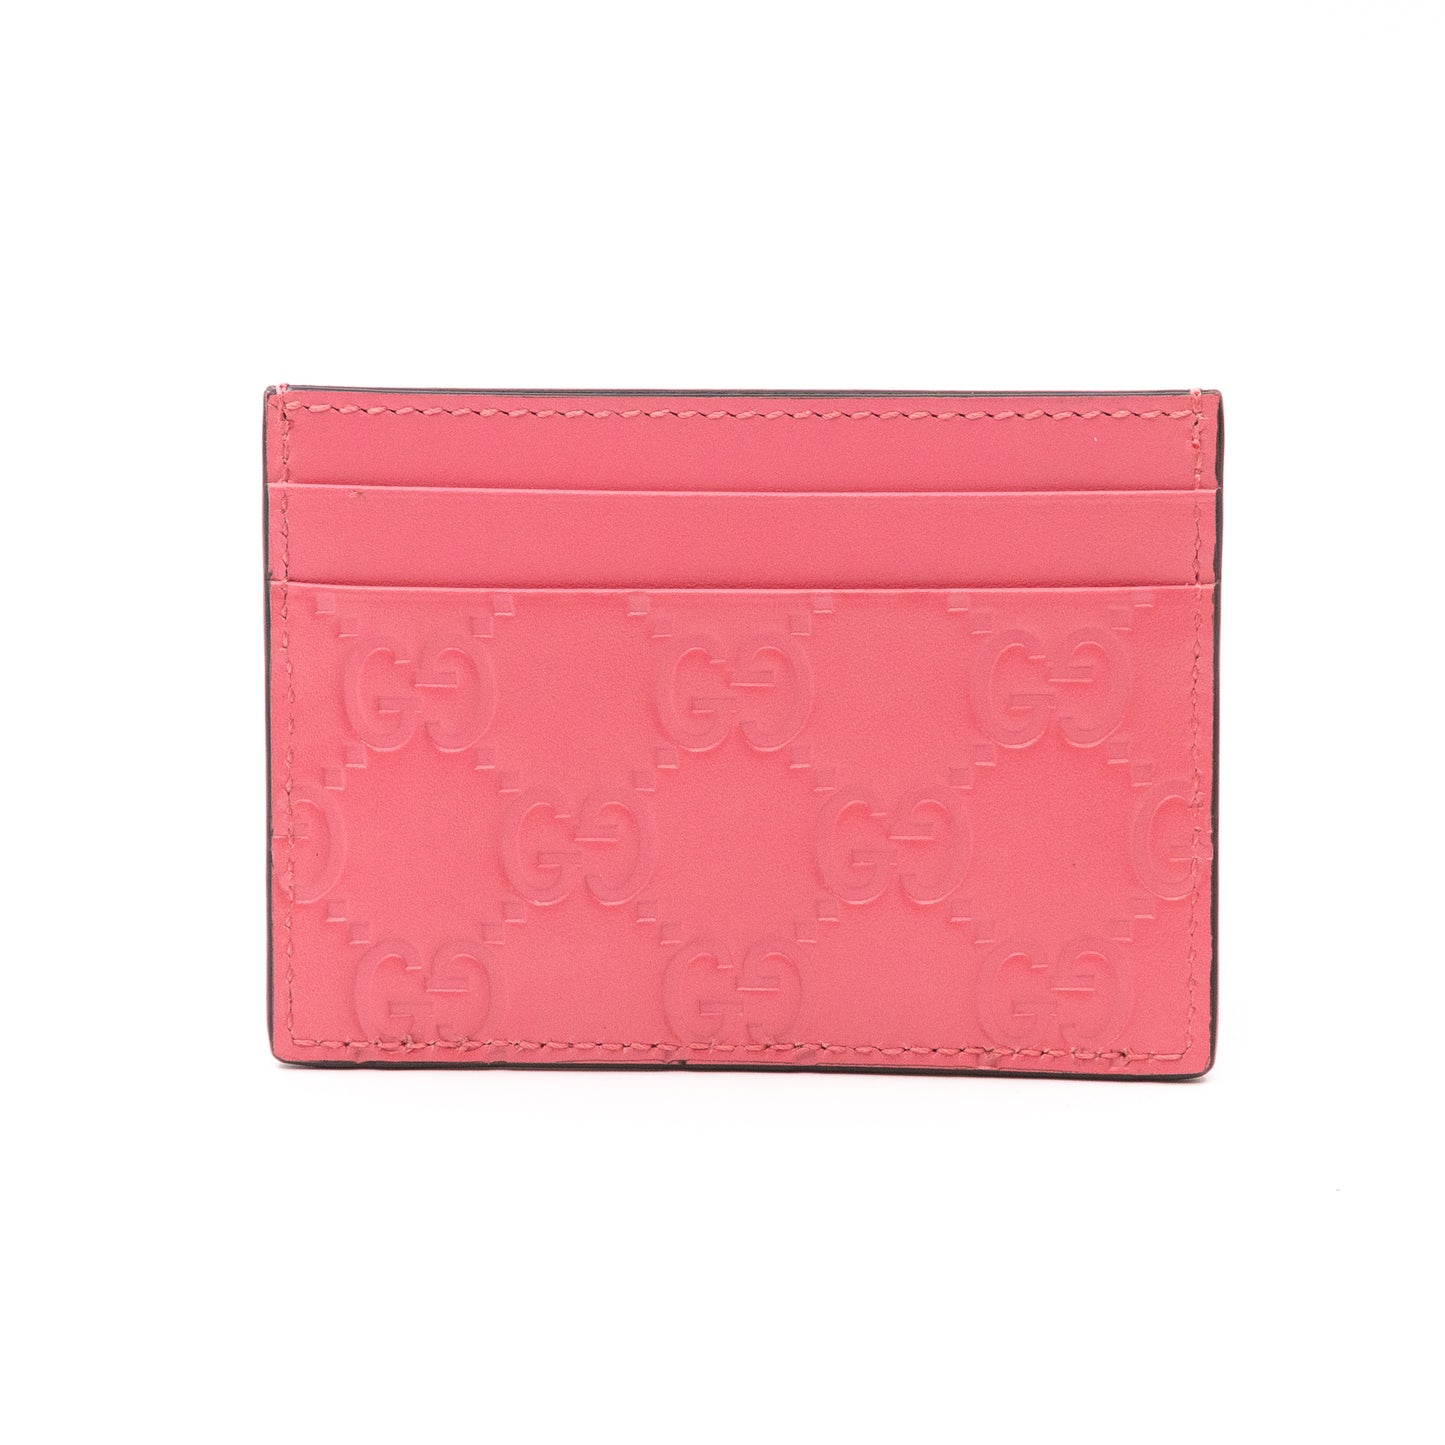 GG Embossed Card Case Pink Leather